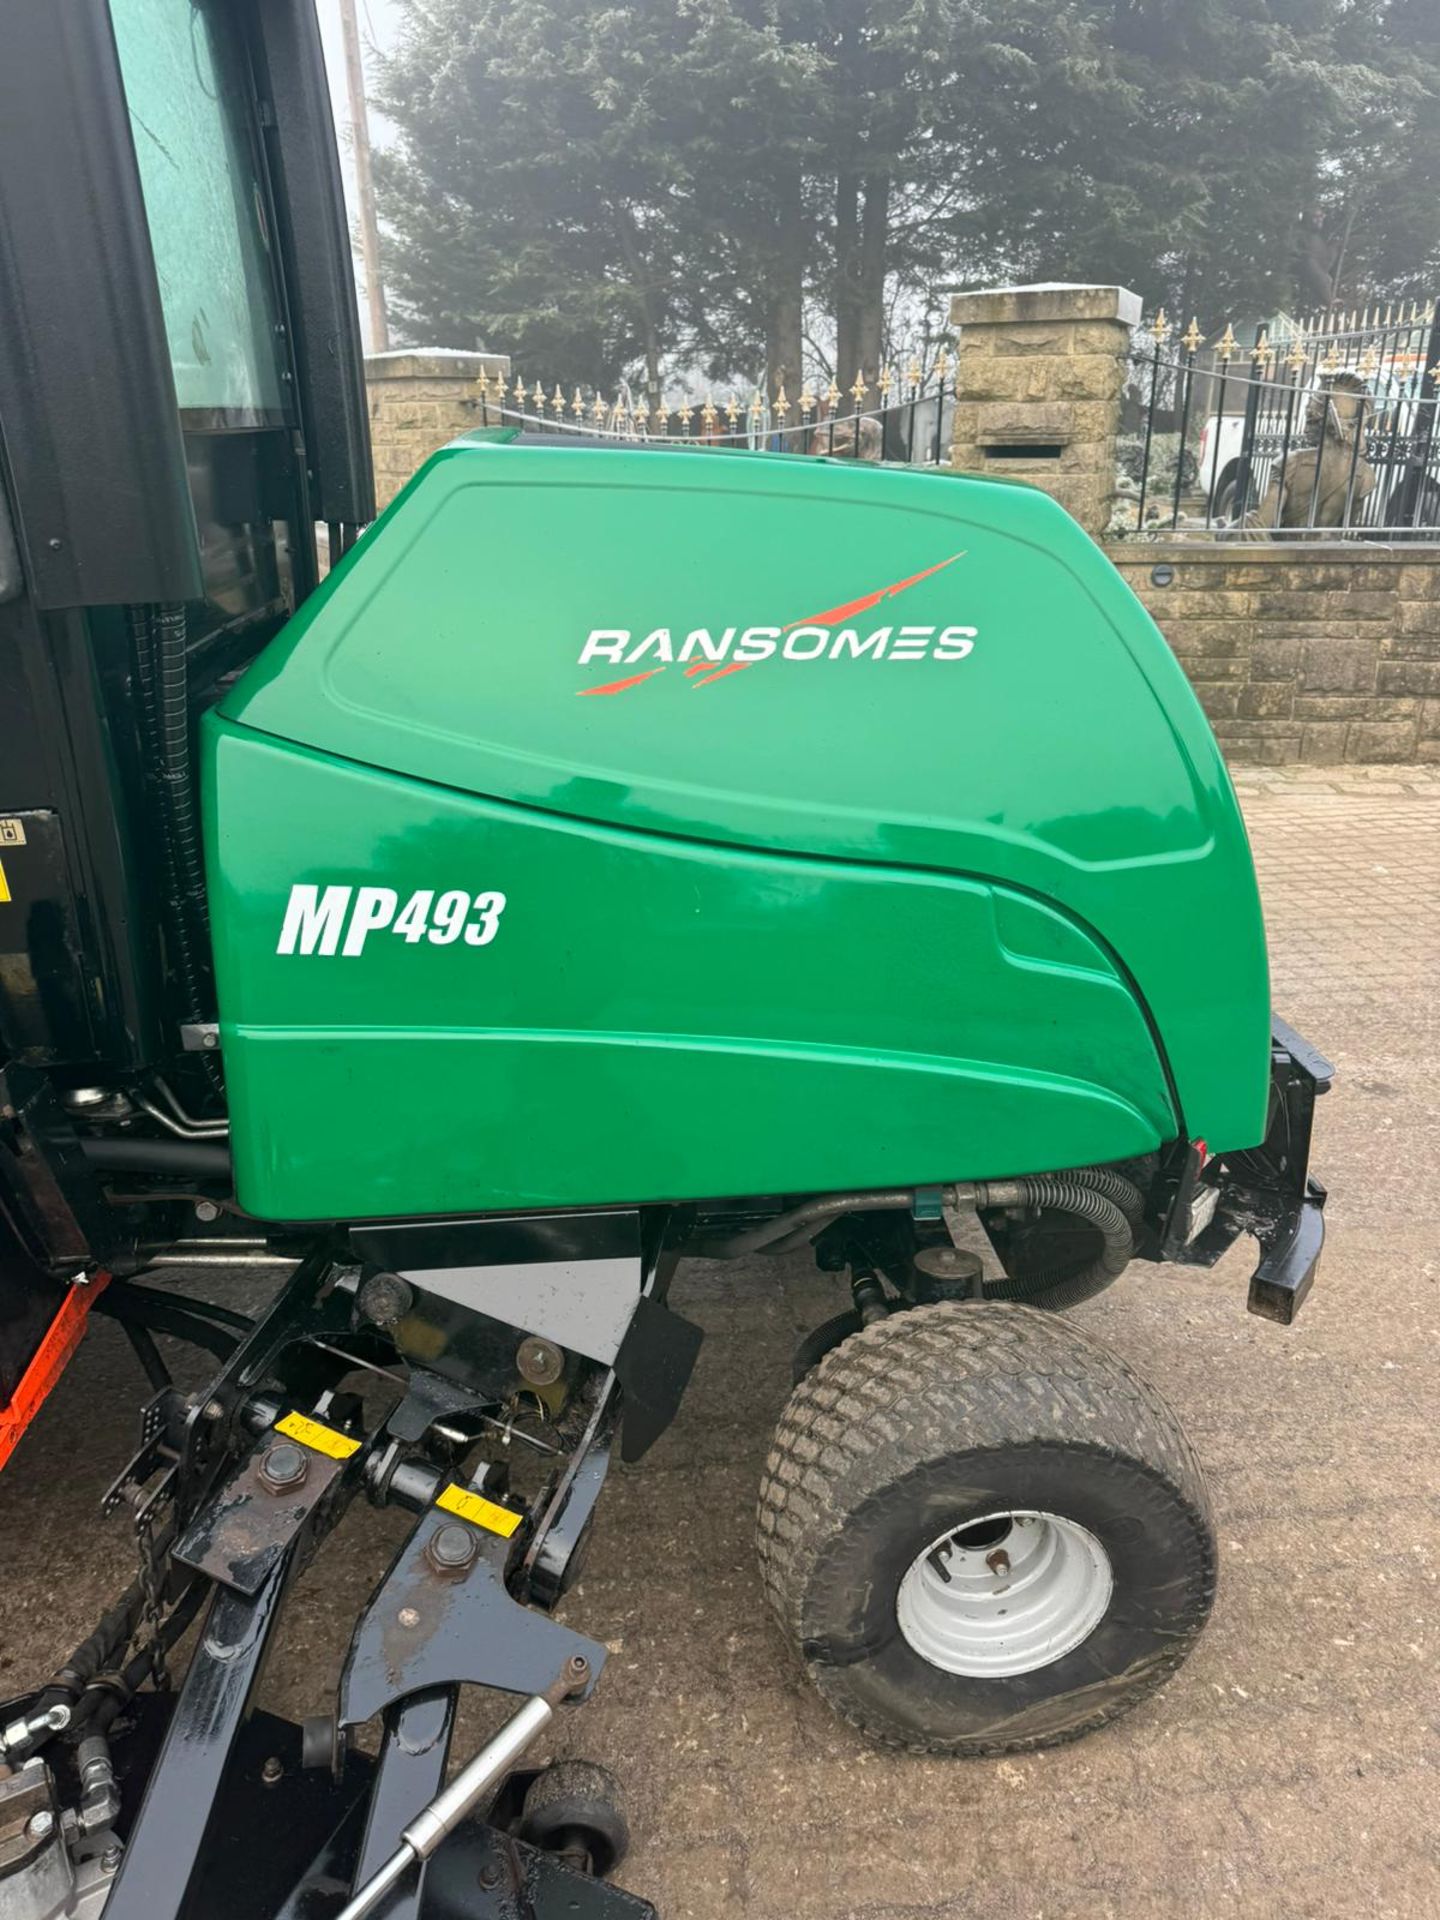 2016 RANSOMES RMP493 BATWING RIDE ON LAWN MOWER WITH FULL GLASS CAB *PLUS VAT* - Image 11 of 33